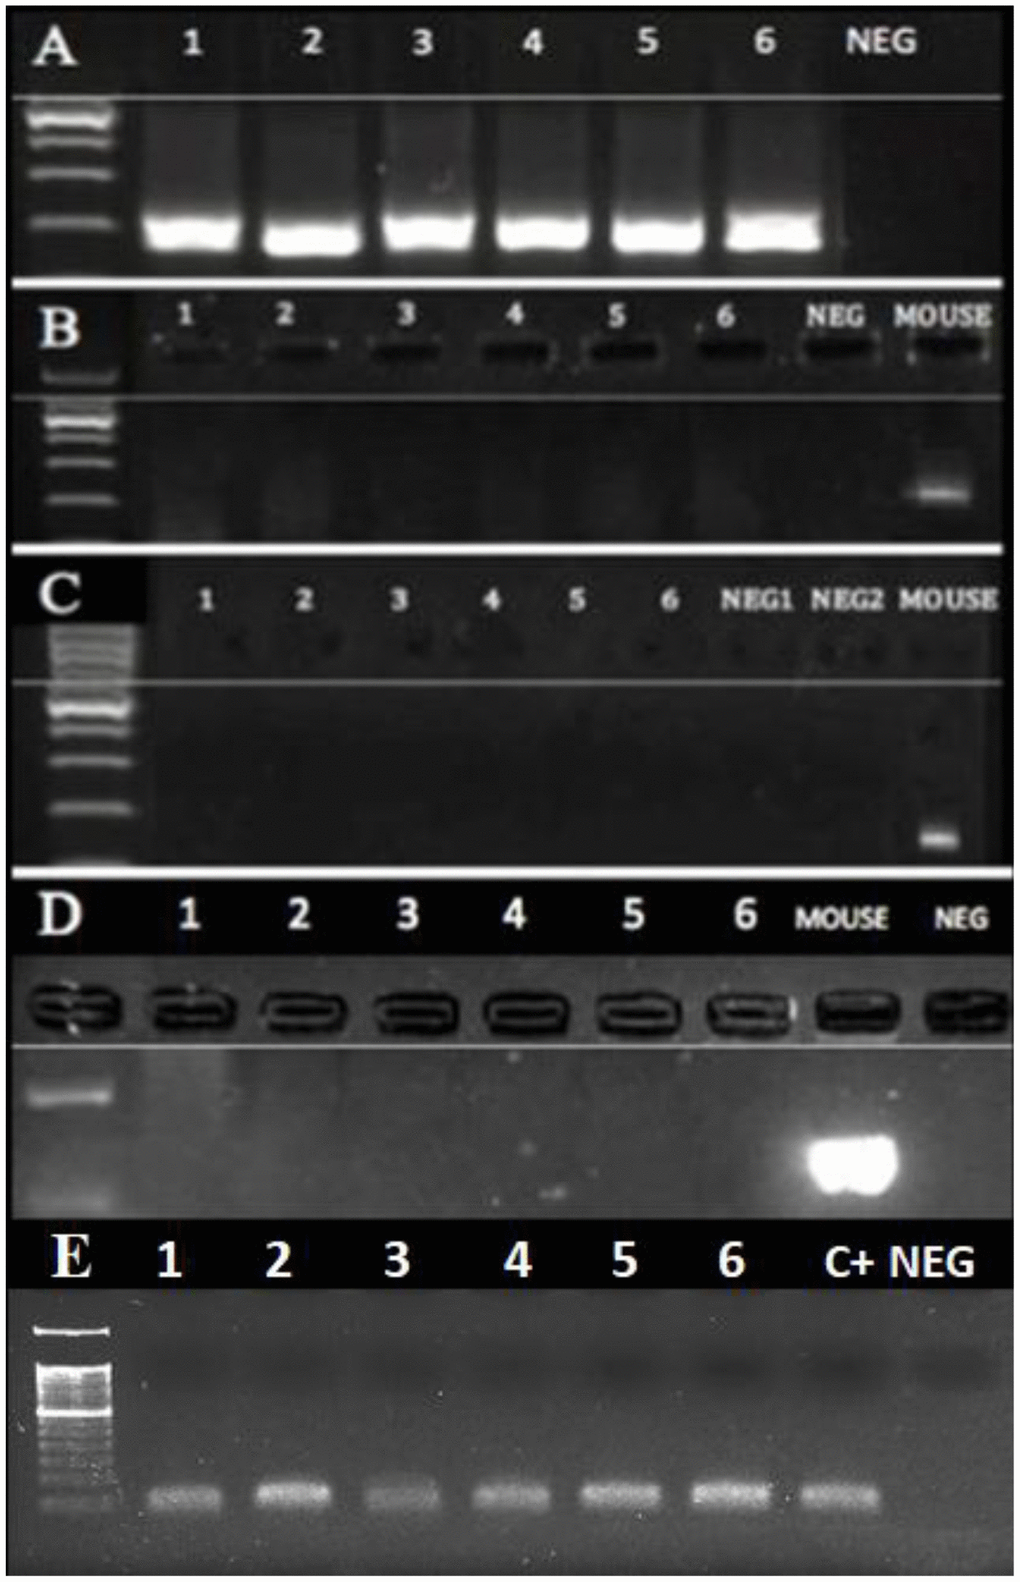 PCR of DNA extracted from the dental calculus. No mouse DNA was present in the six human cases (1-6) that were positive for MMTVels. (A) A 16S rRNA V3 region; all human cases were positive, whereas NEG was the negative control. (B) Intracisternal A Particle (IAP) LTRs; all the human cases were negative, as well as the negative control, whereas the mouse DNA was positive. (C) Murine mitochondrial DNA (mtDNA); all human cases were negative, whereas the mouse DNA was positive. (D) Murine GADPH; all the human cases were negative, whereas the mouse DNA was positive. (E) Human GADPH; all the human cases were positive; c+: a positive human control; neg: a negative control.